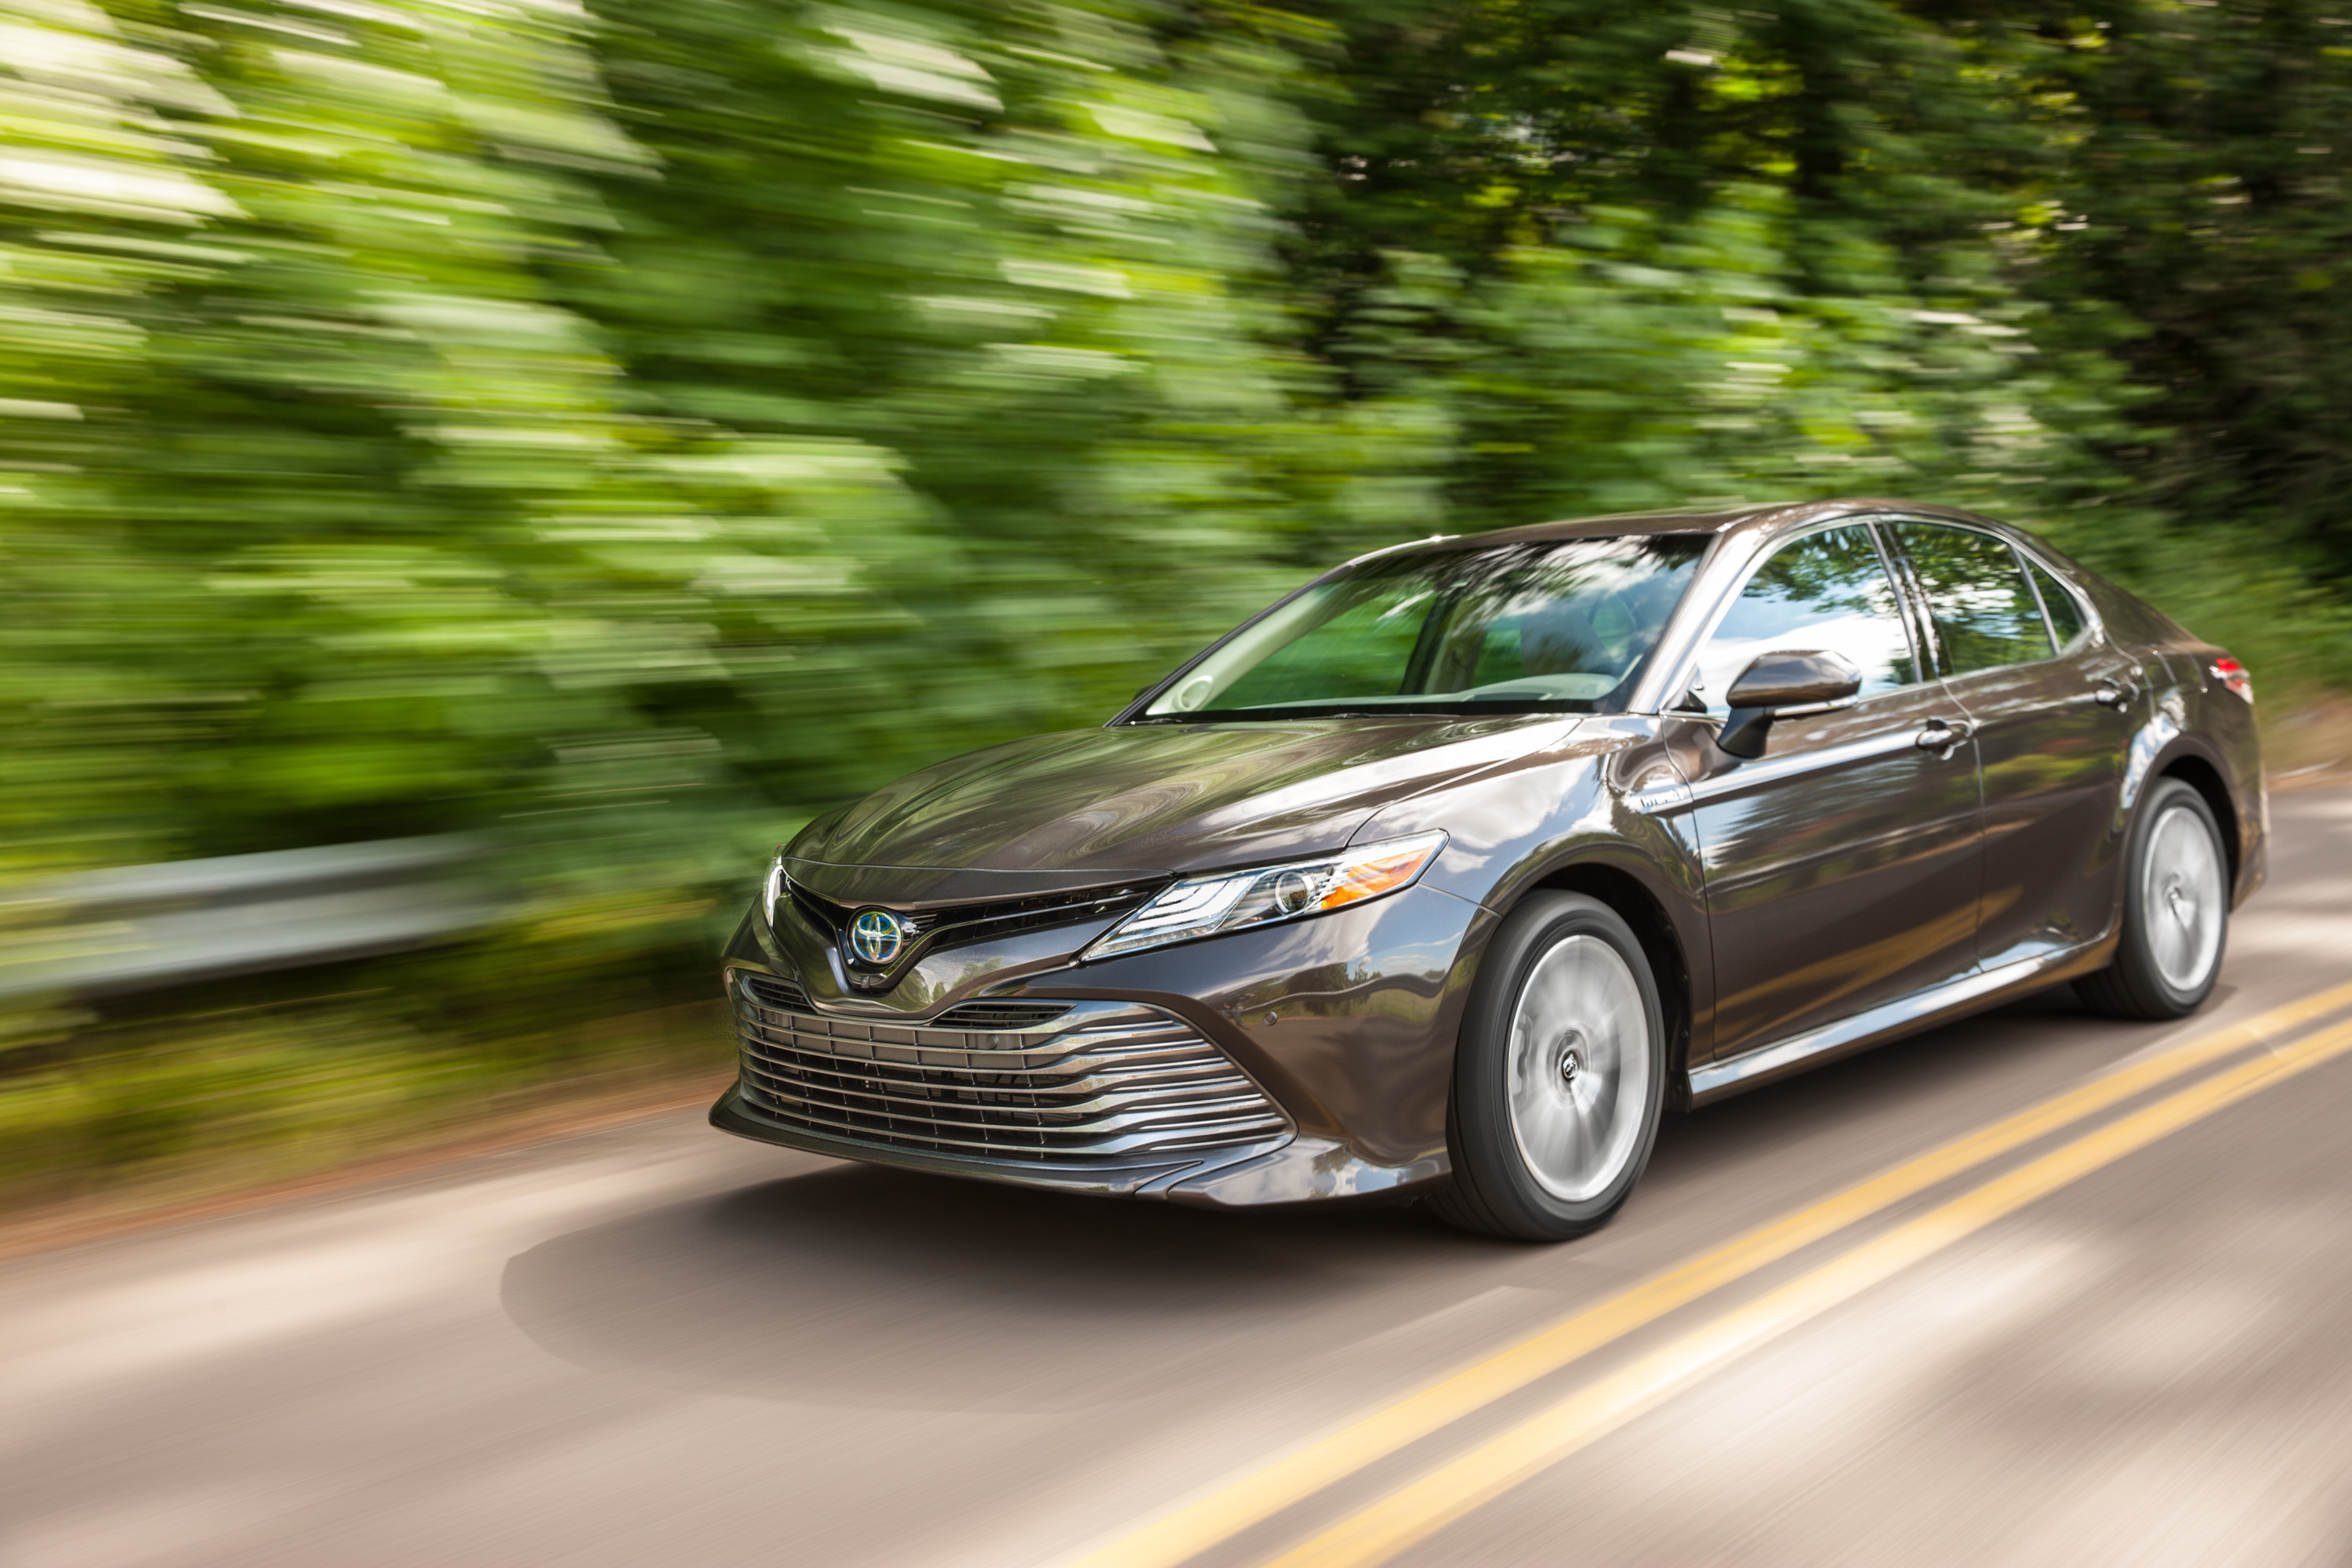 New Camry isn’t sexy, but it is attractively practical | ClassicCars.com